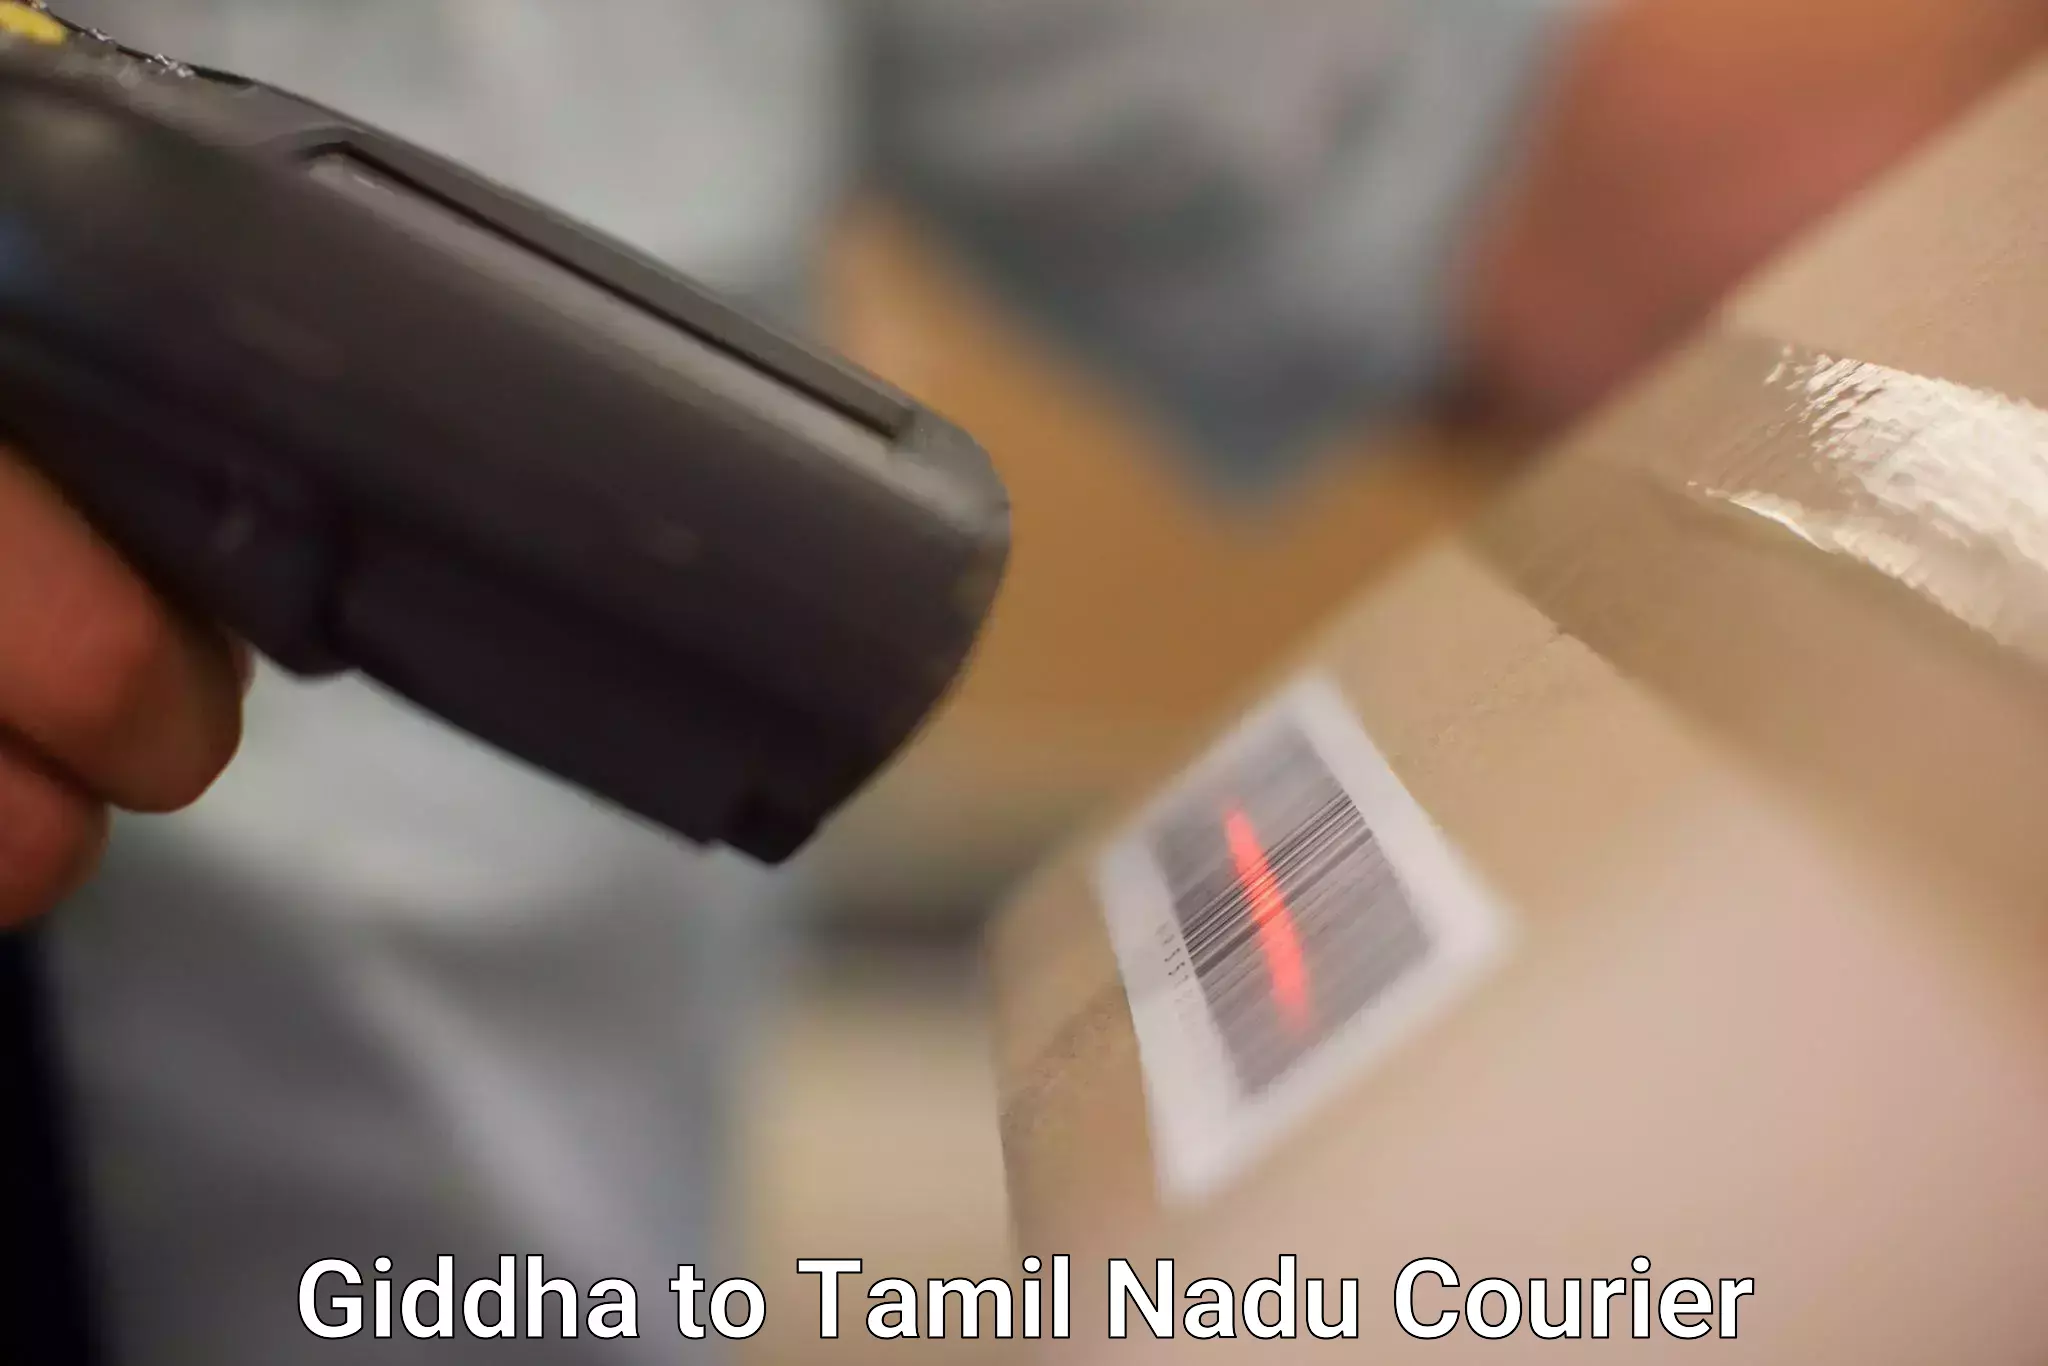 Reliable courier service Giddha to Tuticorin Port